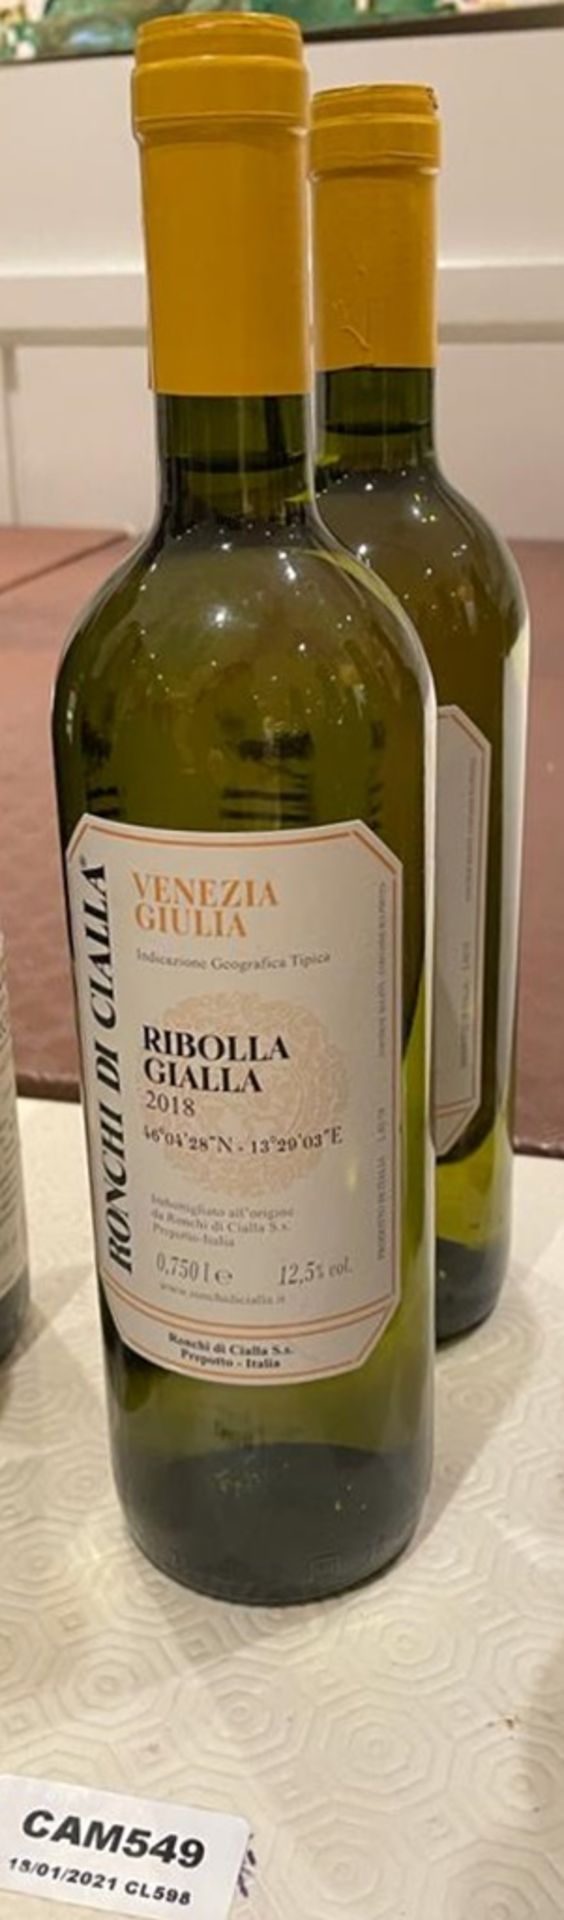 2 x Bottles Of RONCHI DI CIALLA RIBOLLA - 2018 - 75cl - New/Unopened Restaurant Stock - Ref: CAM549 - Image 2 of 2